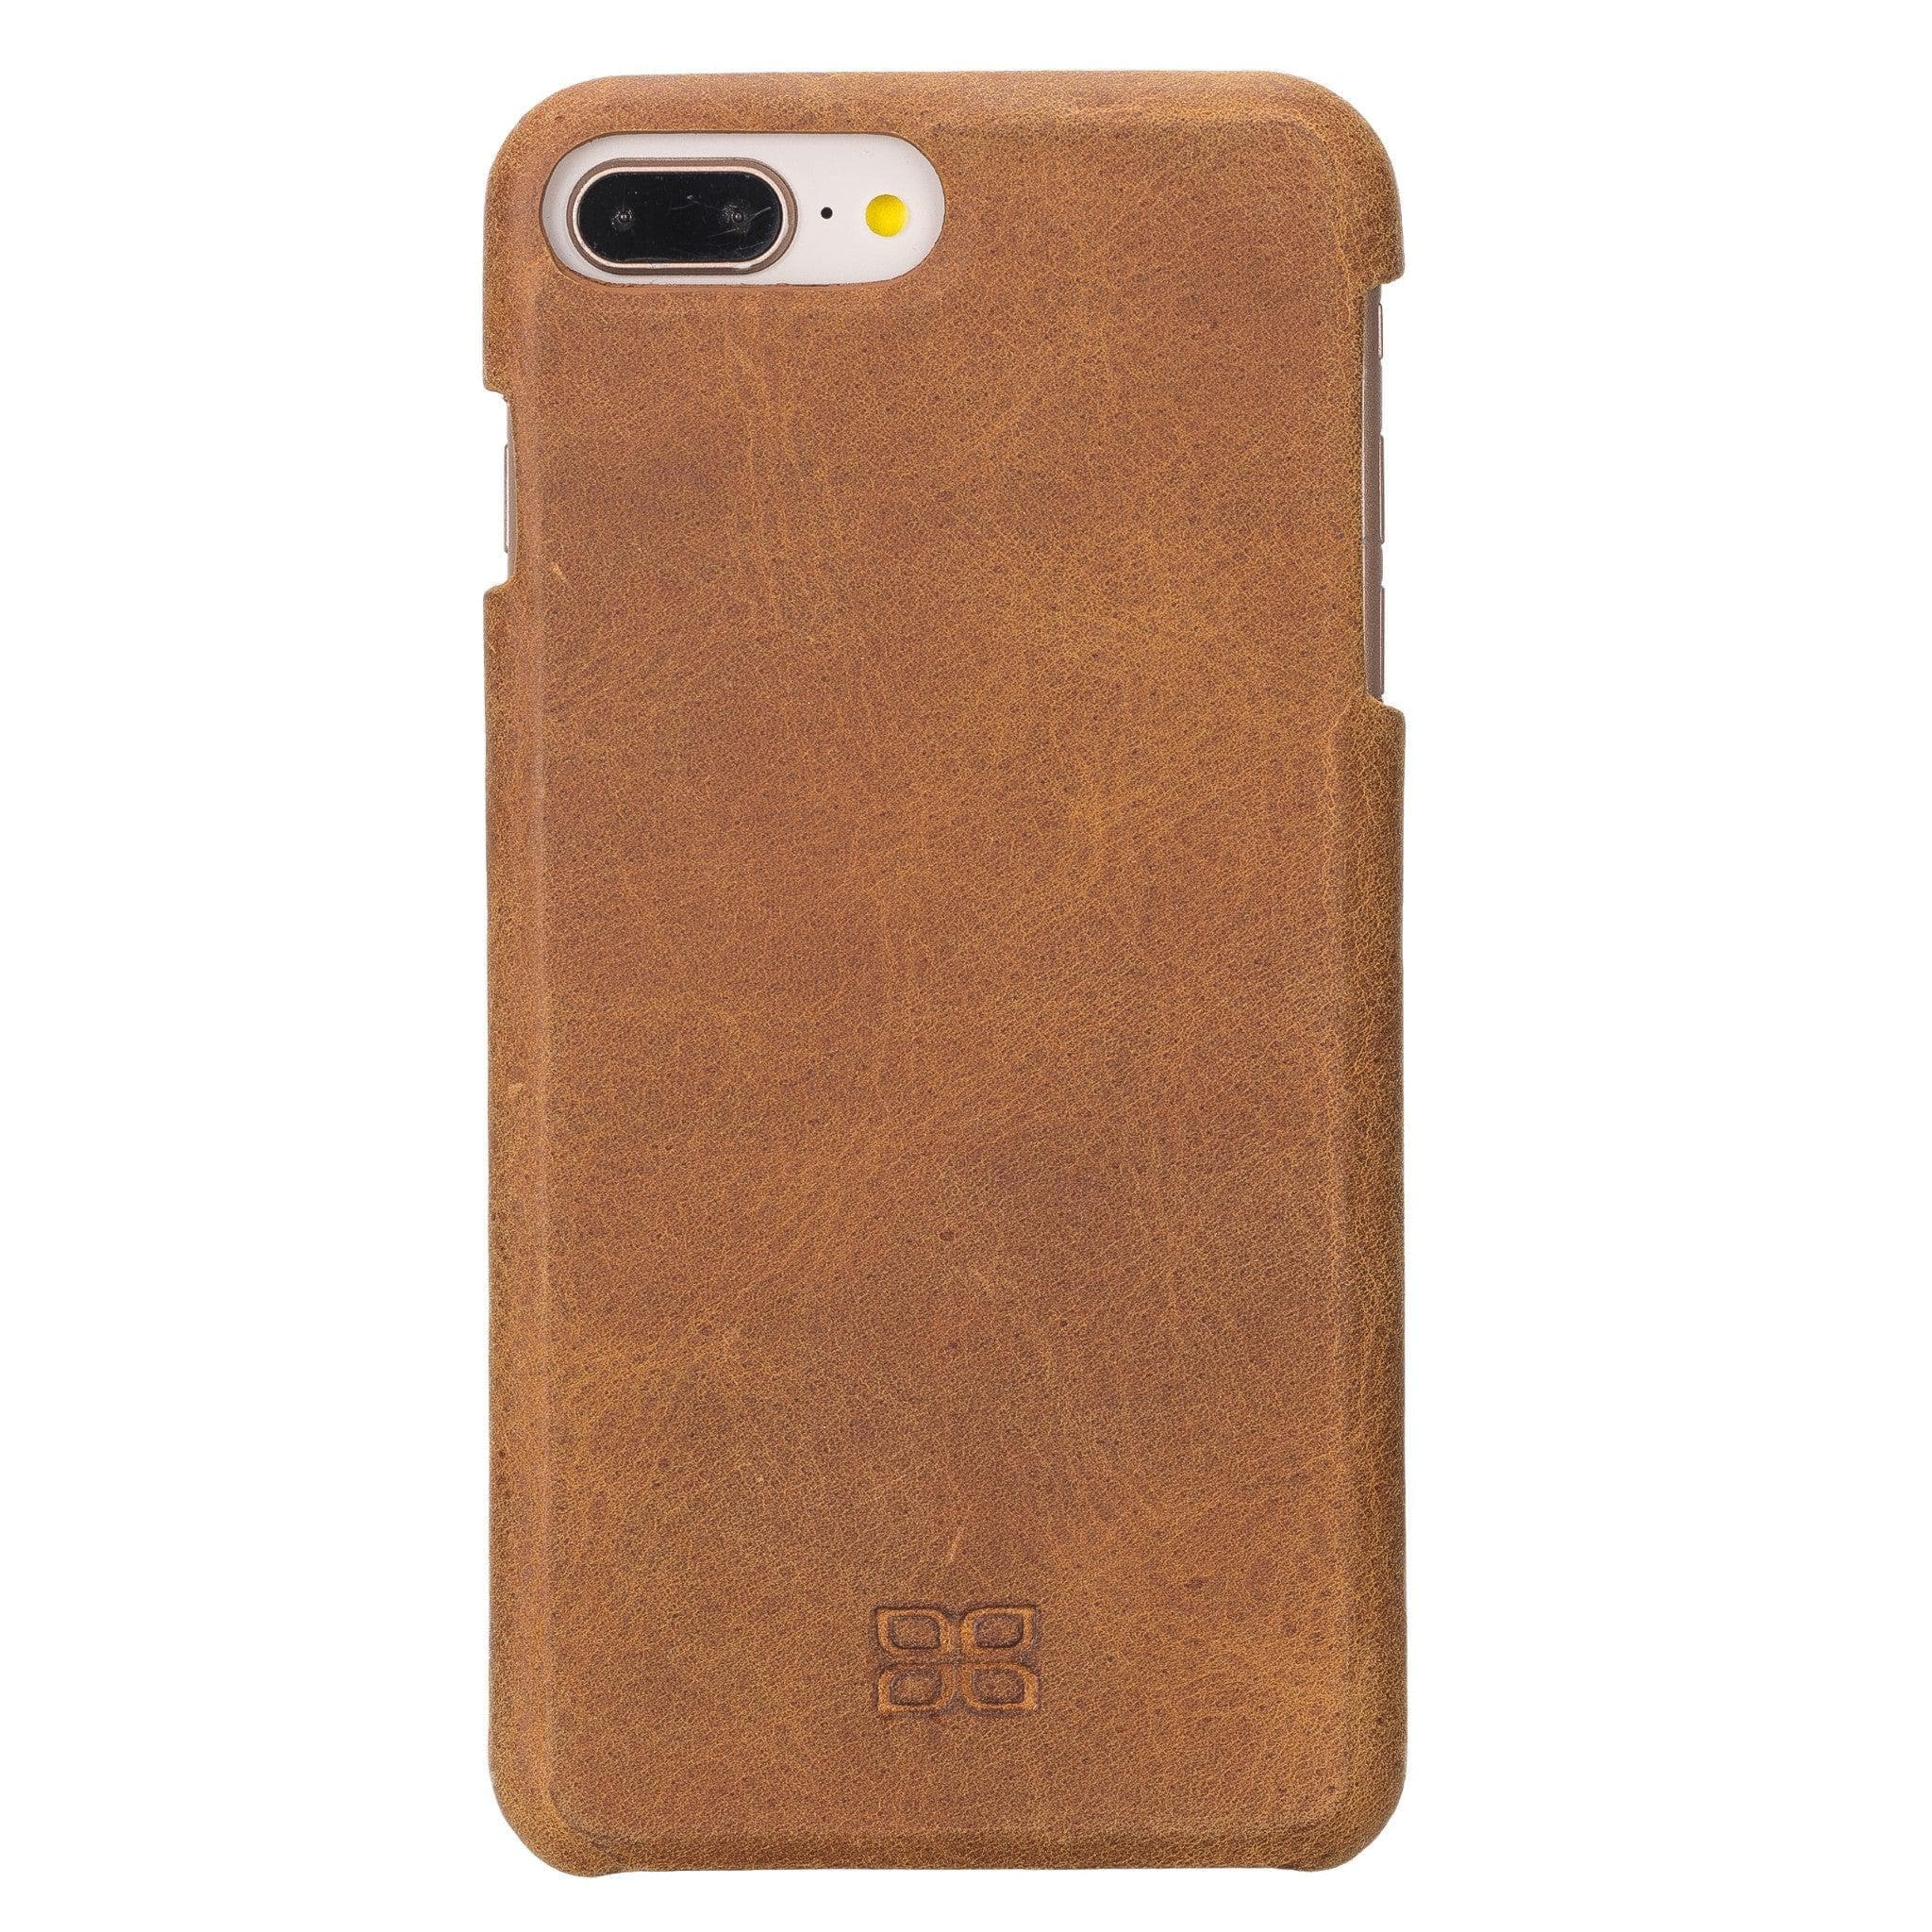 Apple iPhone 8 Series Fully Covering Leather Back Cover Case iPhone 8 / Mat Brown Bouletta LTD